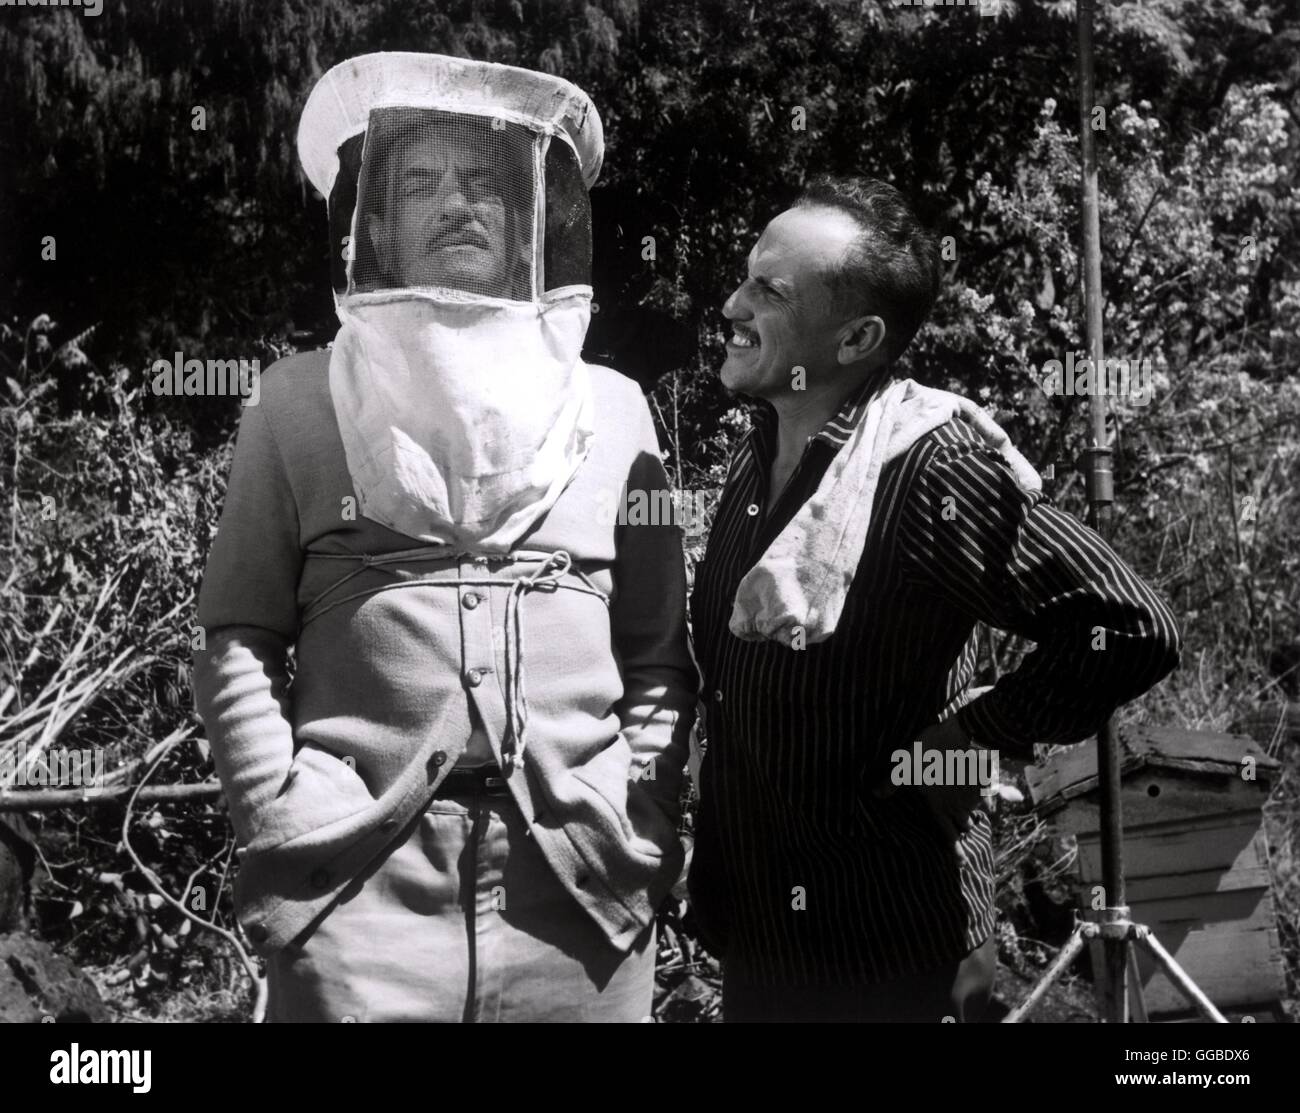 THE YOUNG ONE La Joven Mexiko/USA 1960 Luis Bunuel ' Man from outer space ' says Cinematographer GABRIEL FIGUEROA (right) of Director LUIS BUNUEL who tries on a bee protection mask during the shooting of 'The Young One / La Joven' (1960). Regie: Luis Bunuel aka. La Joven Stock Photo